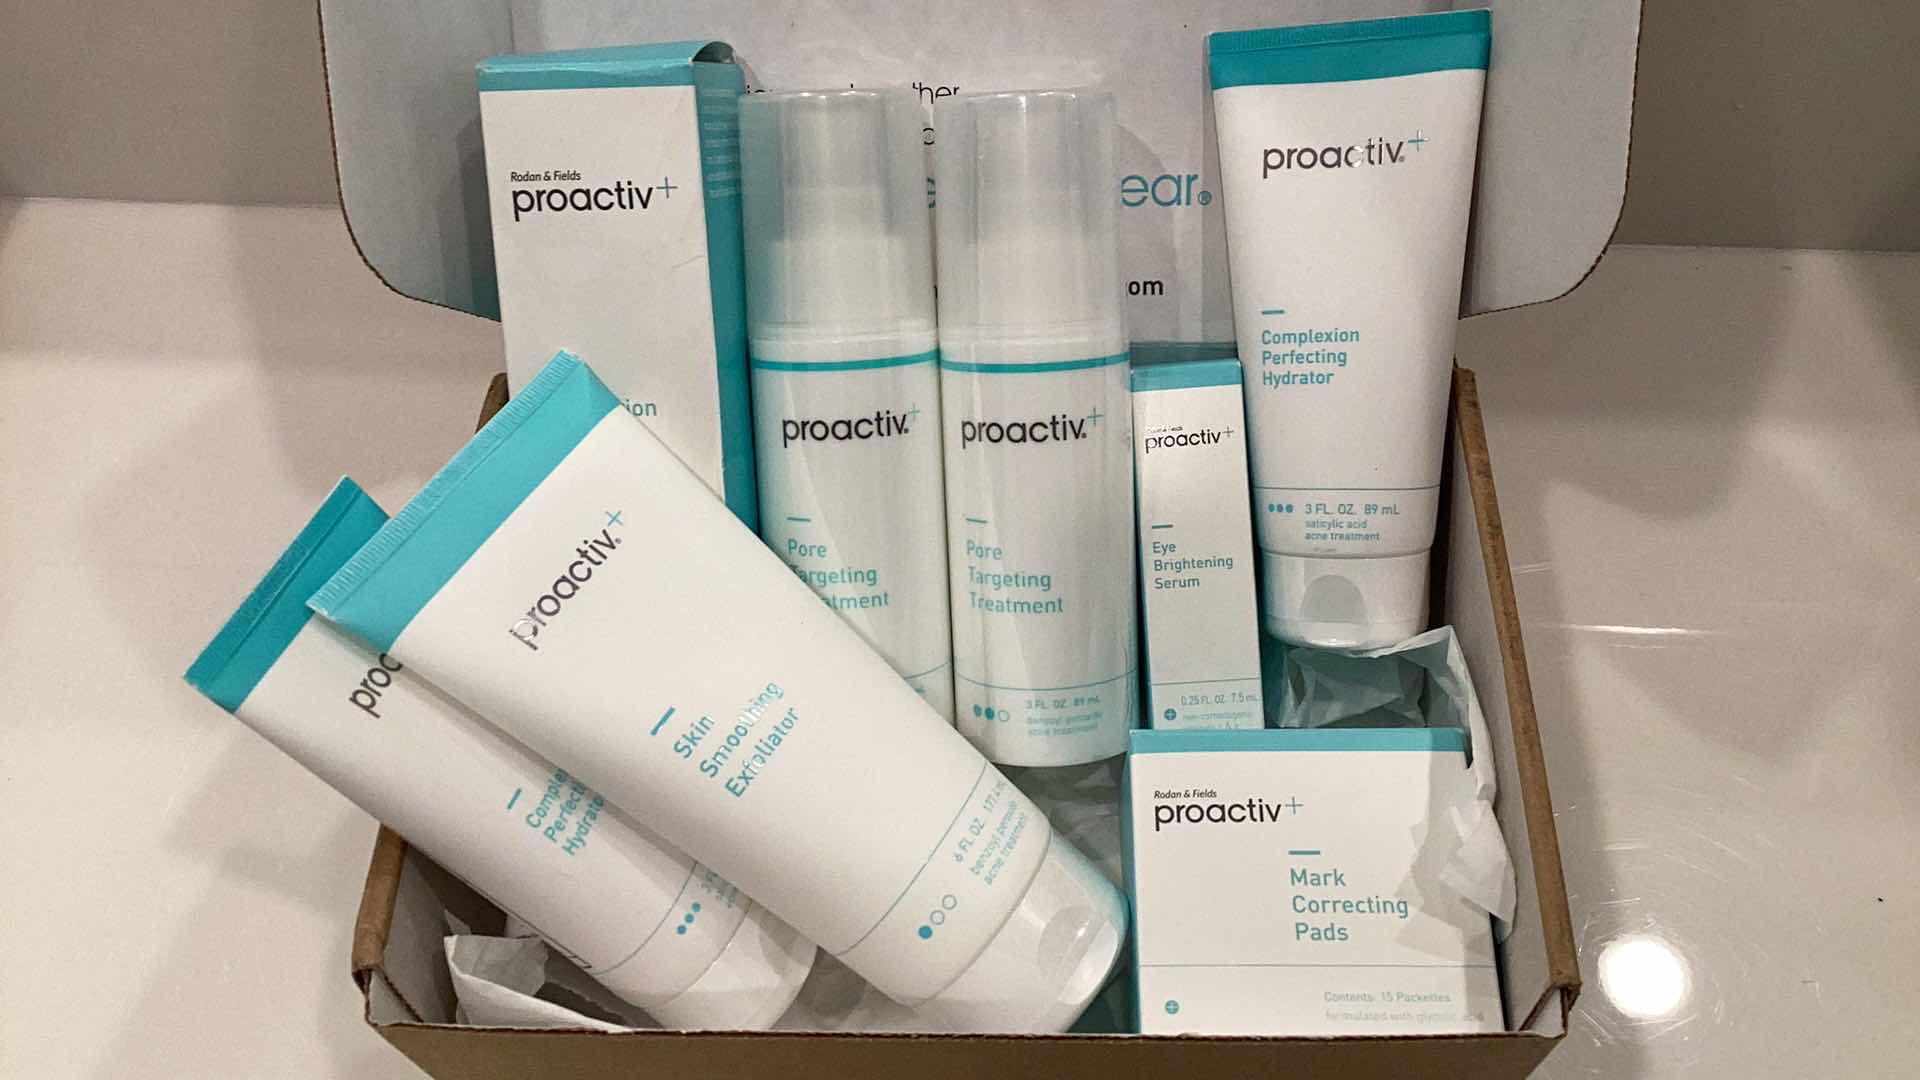 Photo 2 of PROACTIVE THIS PRODUCT IS EXPIRED BUT ITS SEALED FROM FACTORY IT INCLUDES COMPLEXION PERFECTING HYDRATOR, SKIN SMOOTHING EXFOLIATOR, MARK CORRECTING PADS, EYE BRIGHTENING SERUM, AND OTHER SKIN ESSENTIALS FOR EVERYDAY ROUTINE.